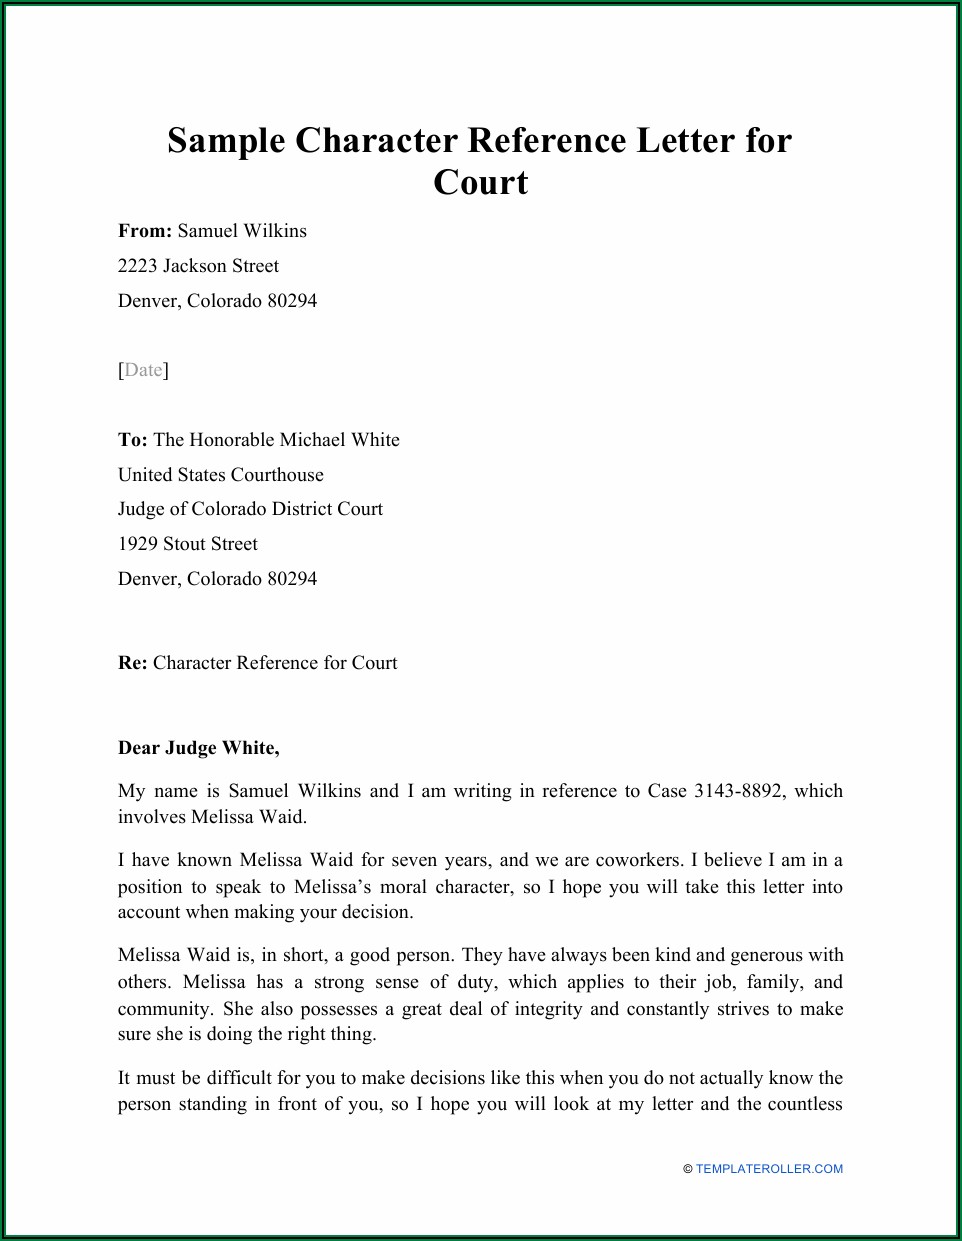 Sample Character Reference Letter For Court Pdf Uk